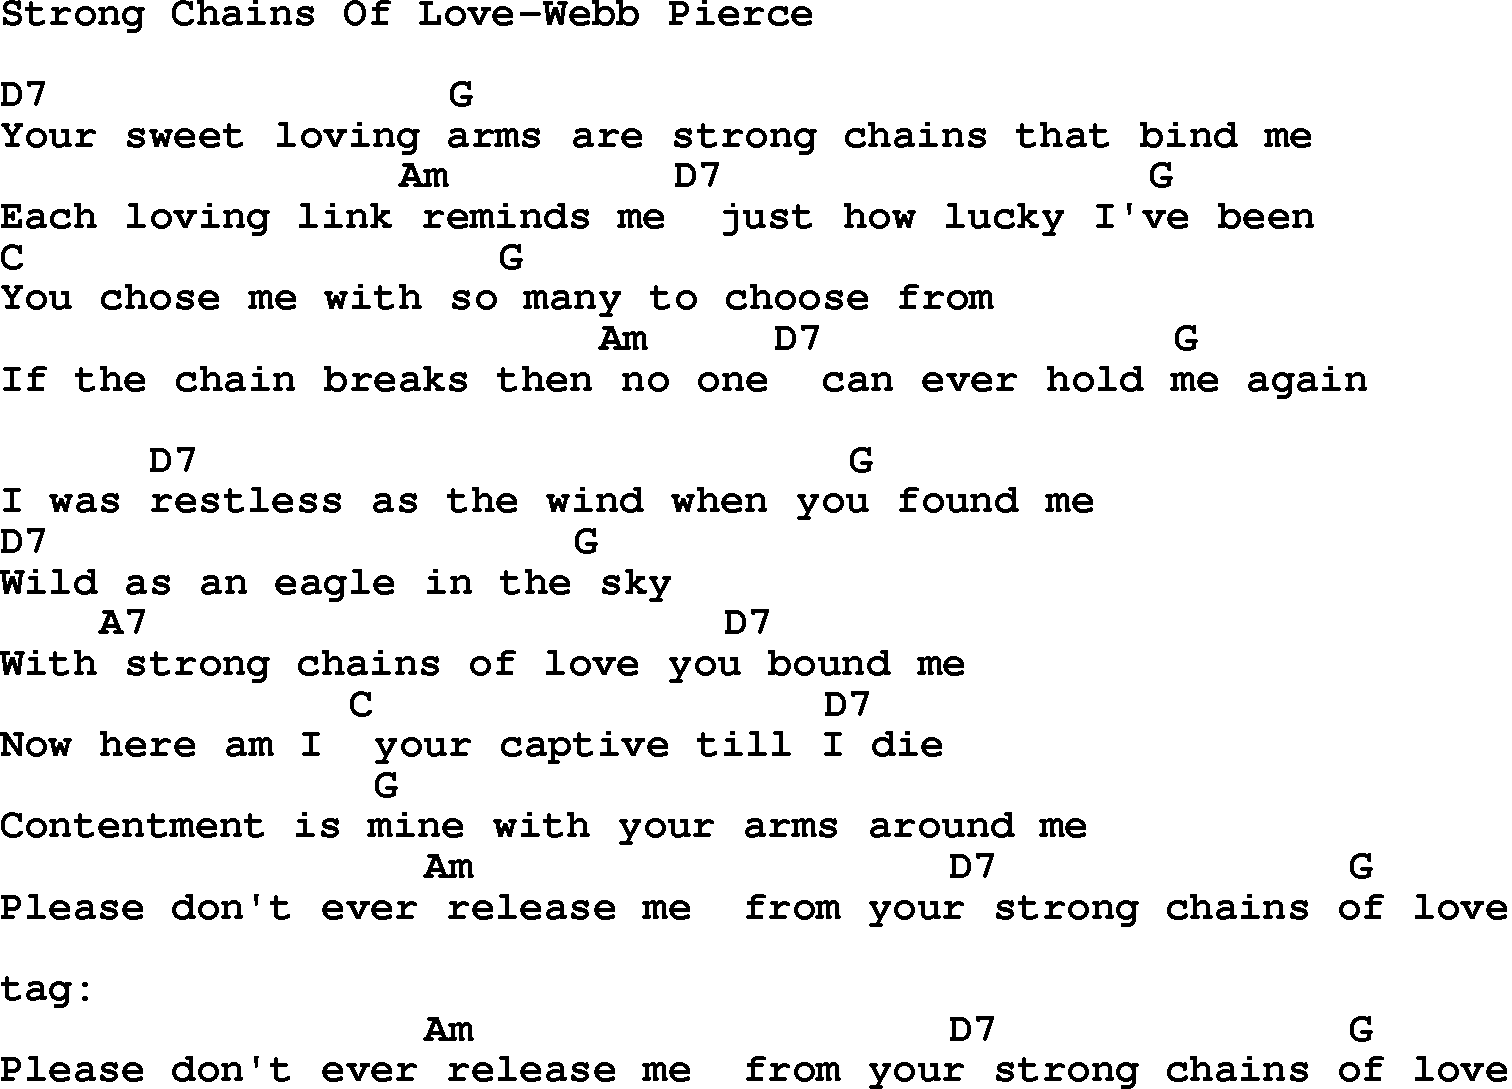 Country music song: Strong Chains Of Love-Webb Pierce lyrics and chords